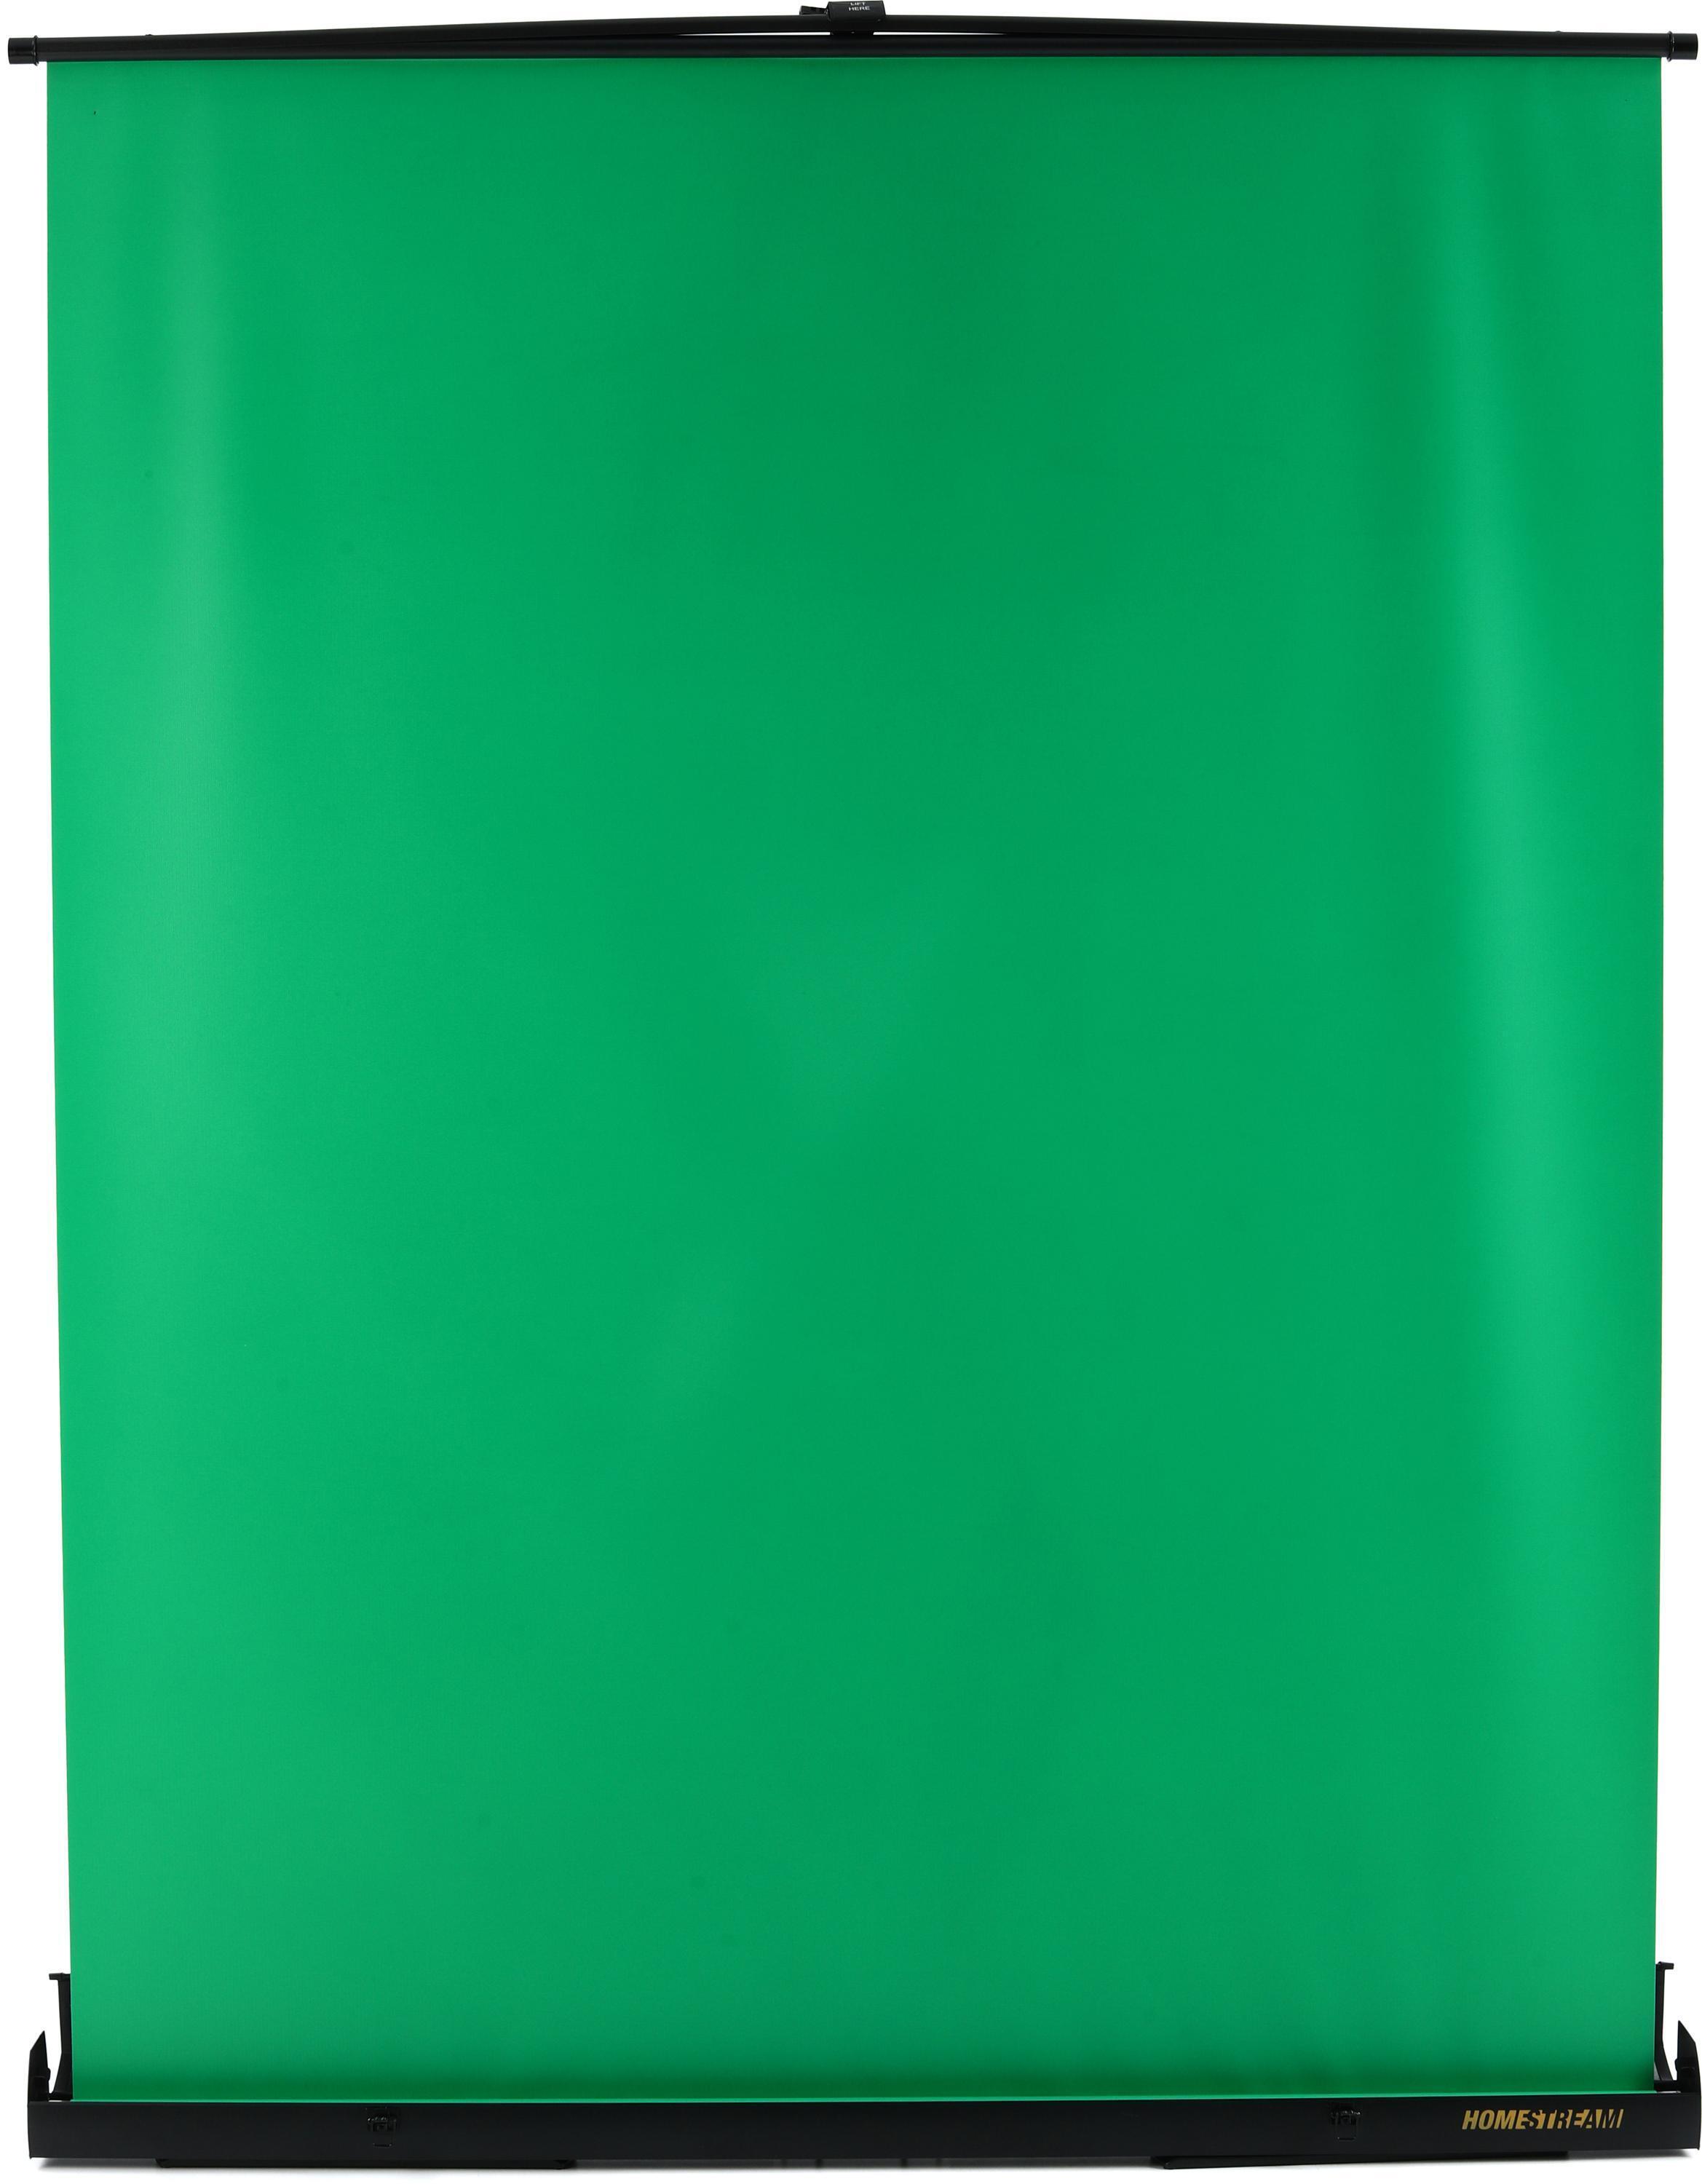 Bundled Item: Ikan HS-GS76 Homestream Portable Pull-up Chroma Key Green Screen - 76 Inches